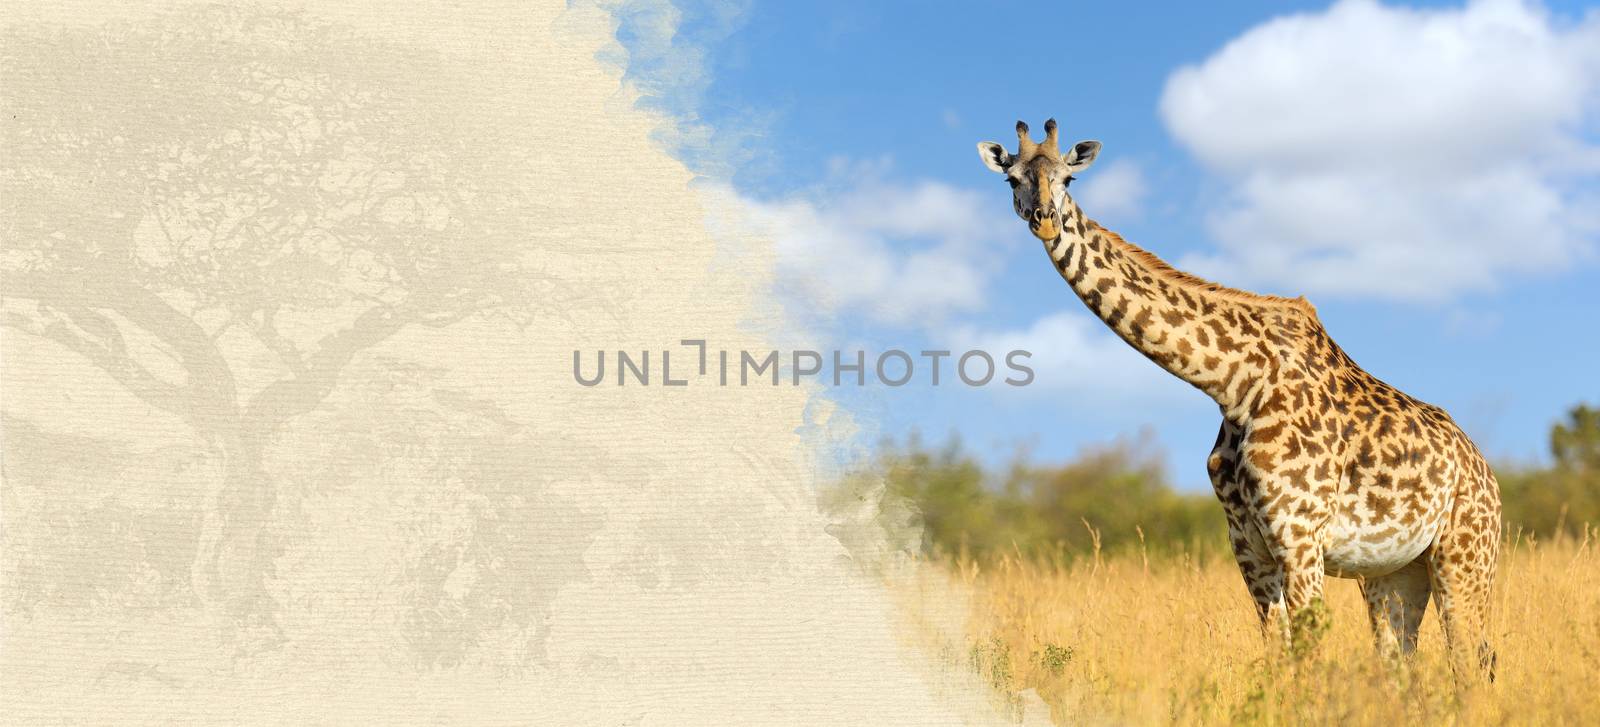 Giraffe on textured paper. Animal on a background of old paper